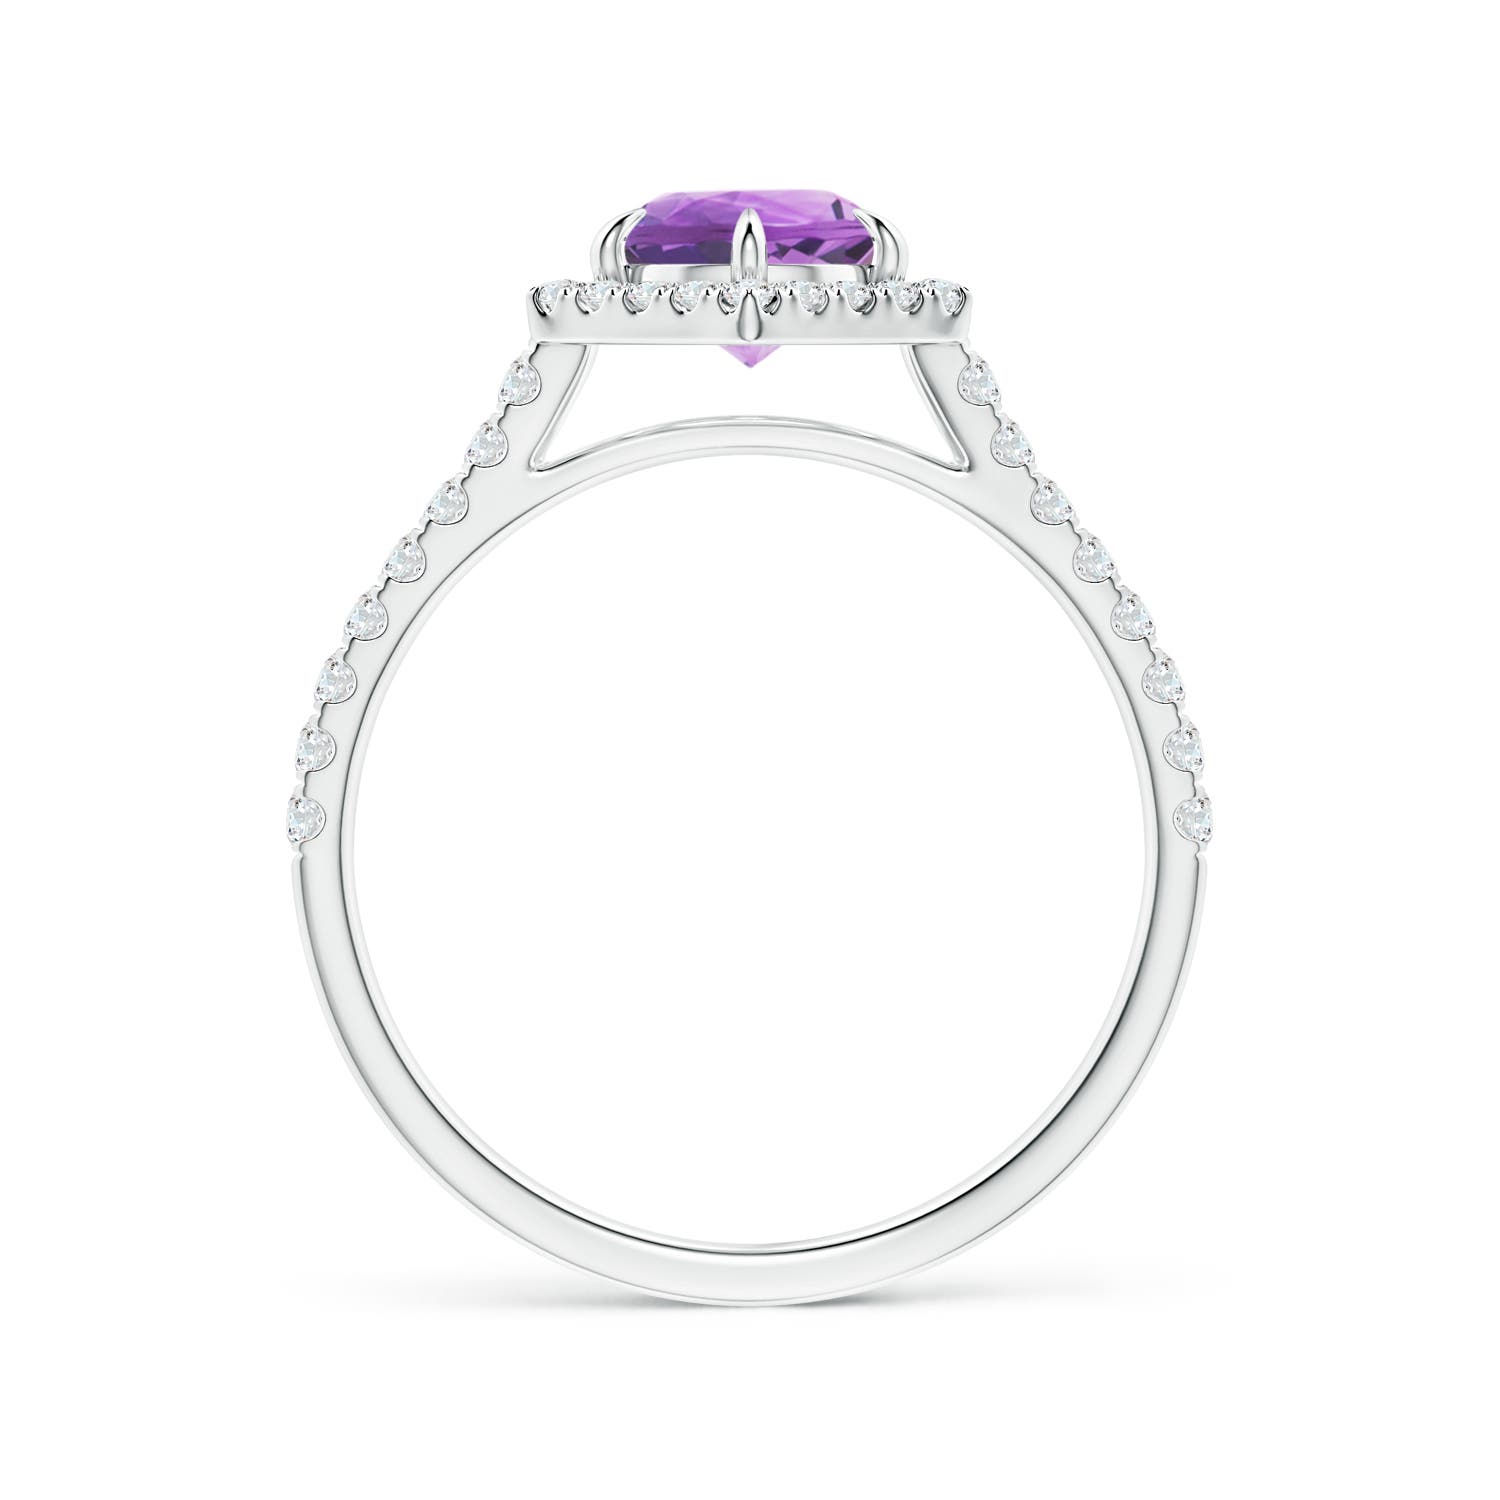 A - Amethyst / 1.14 CT / 14 KT White Gold